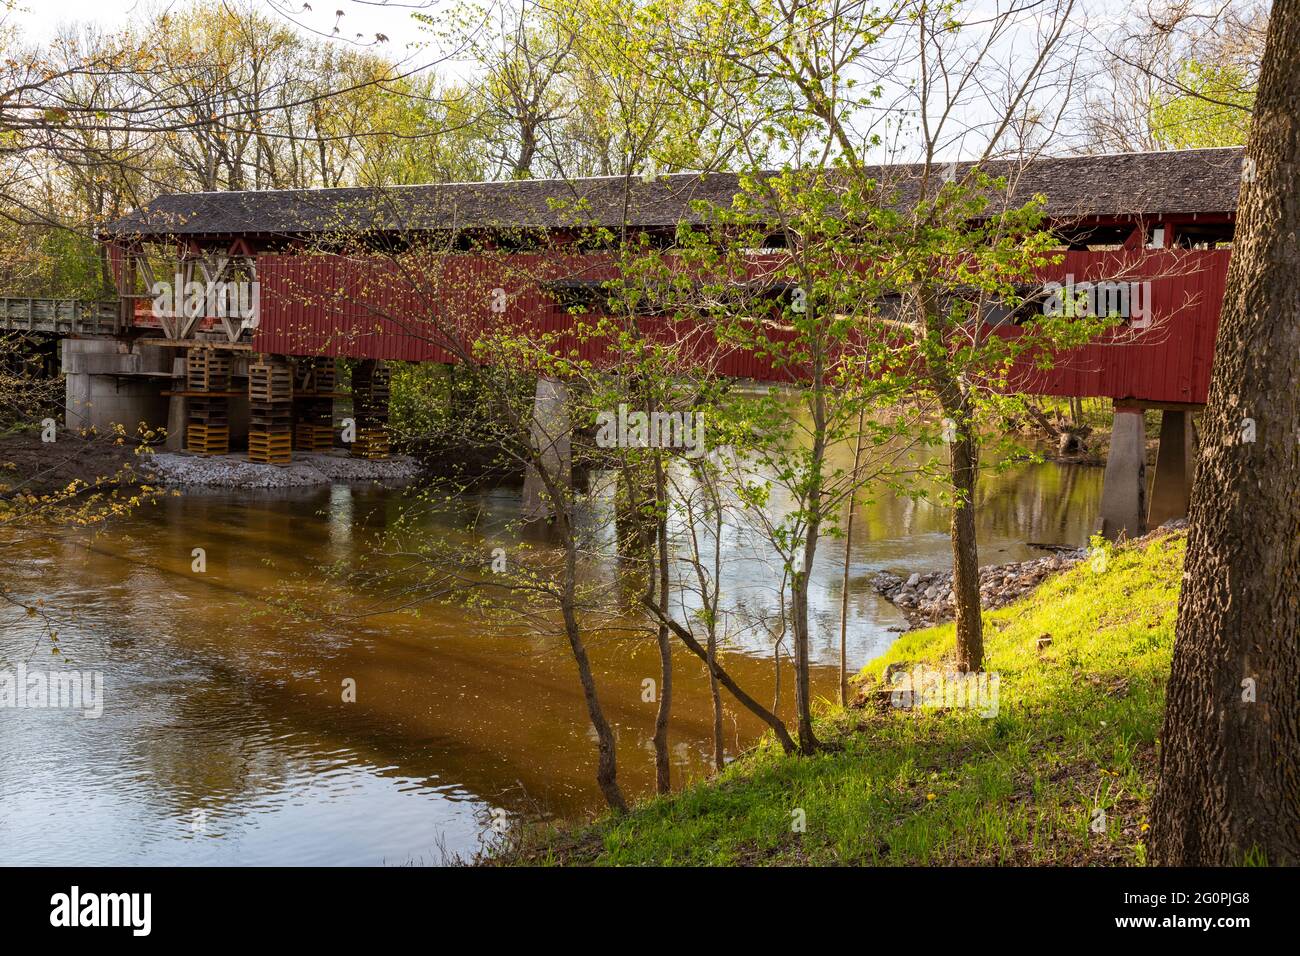 The 1873 Spencerville Covered Bridge, closed for rehabilitation, spans the St. Joseph River at Spencerville, Indiana, USA. Stock Photo